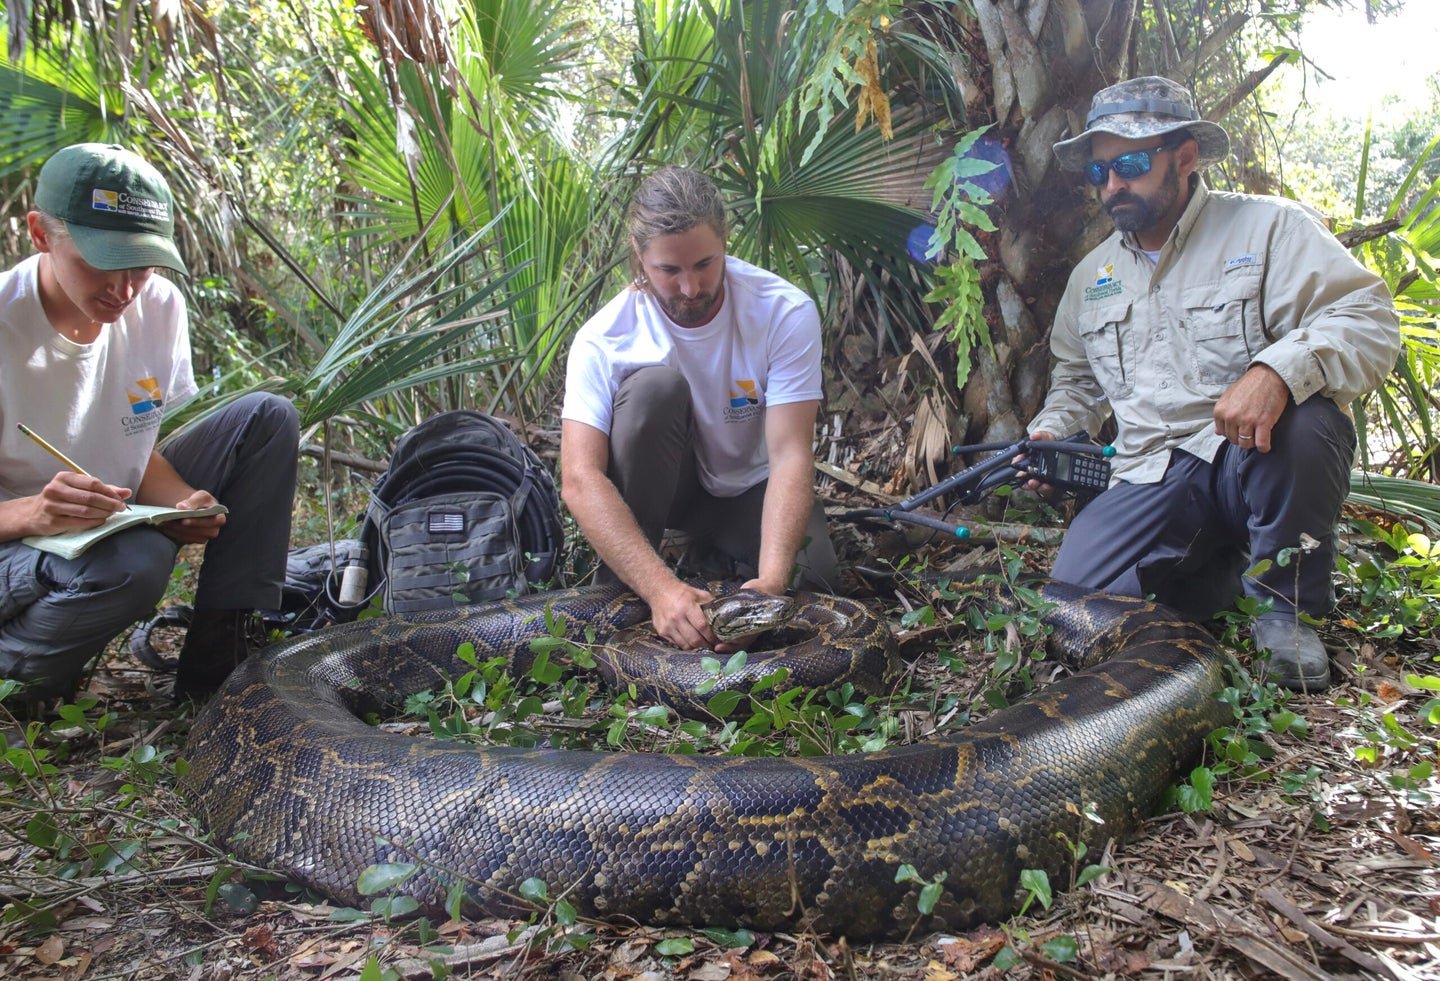 Largest Python Ever Captured in Florida Is Nearly 18 Feet Long